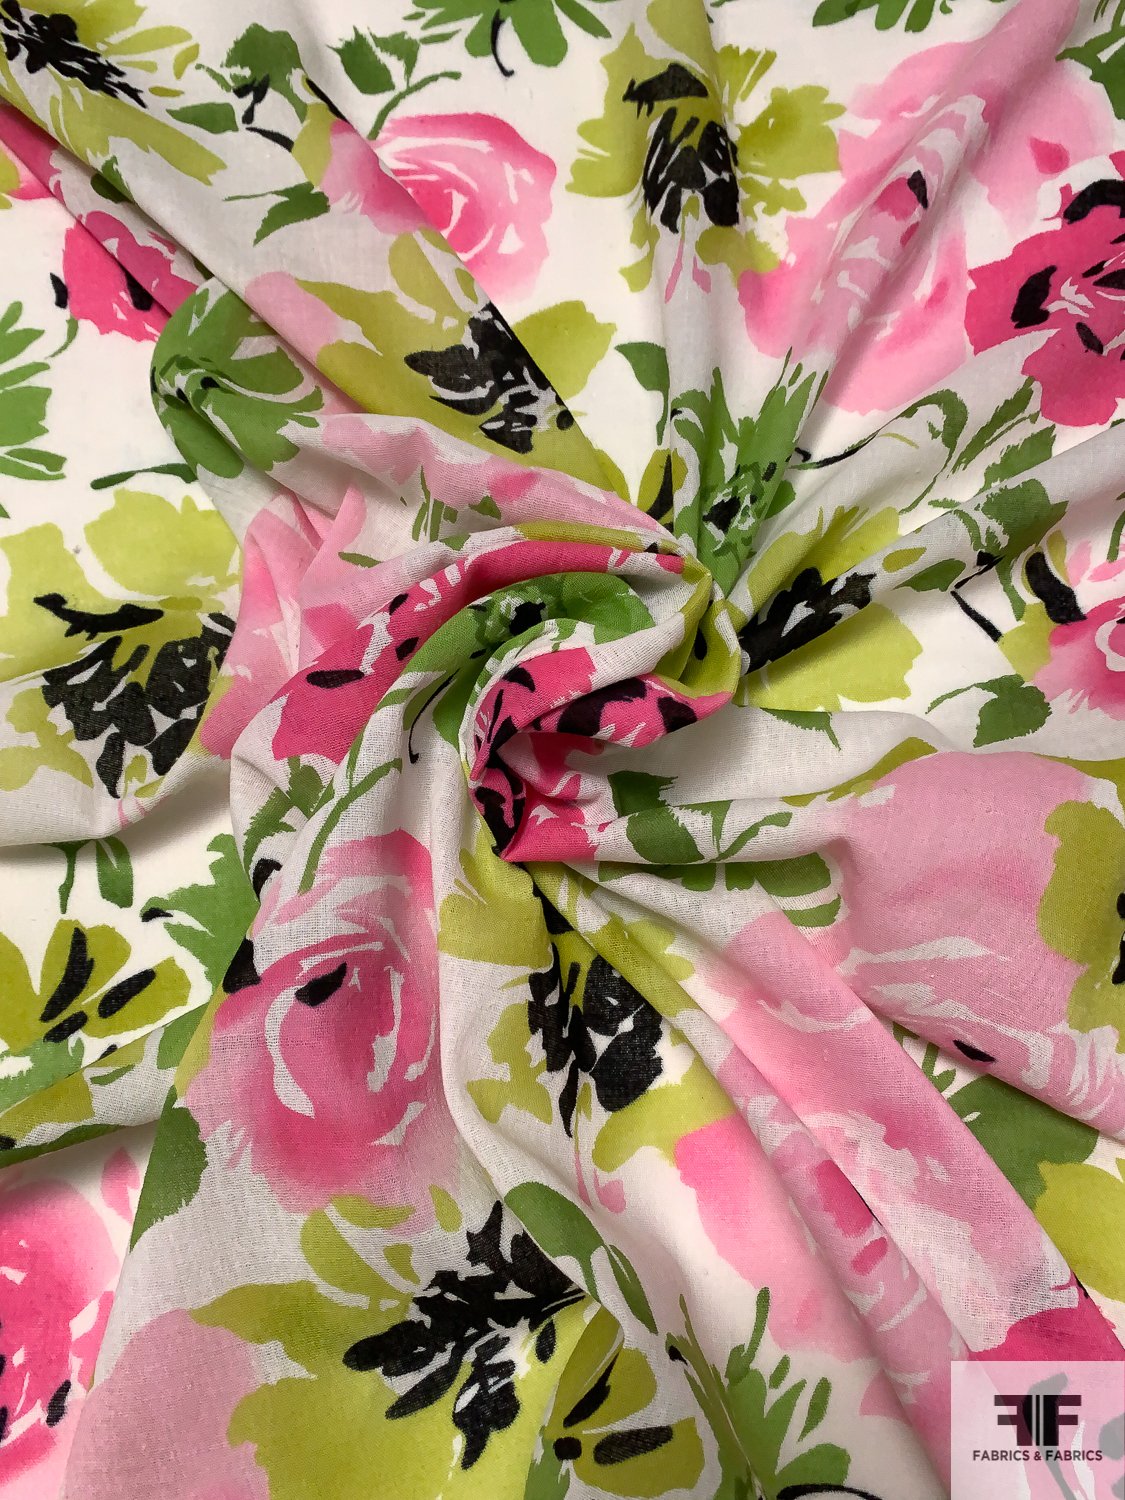 Watercolor Floral Printed Cotton Gauze - Green / Chartreuse / Pink / White  - Fabric by the Yard